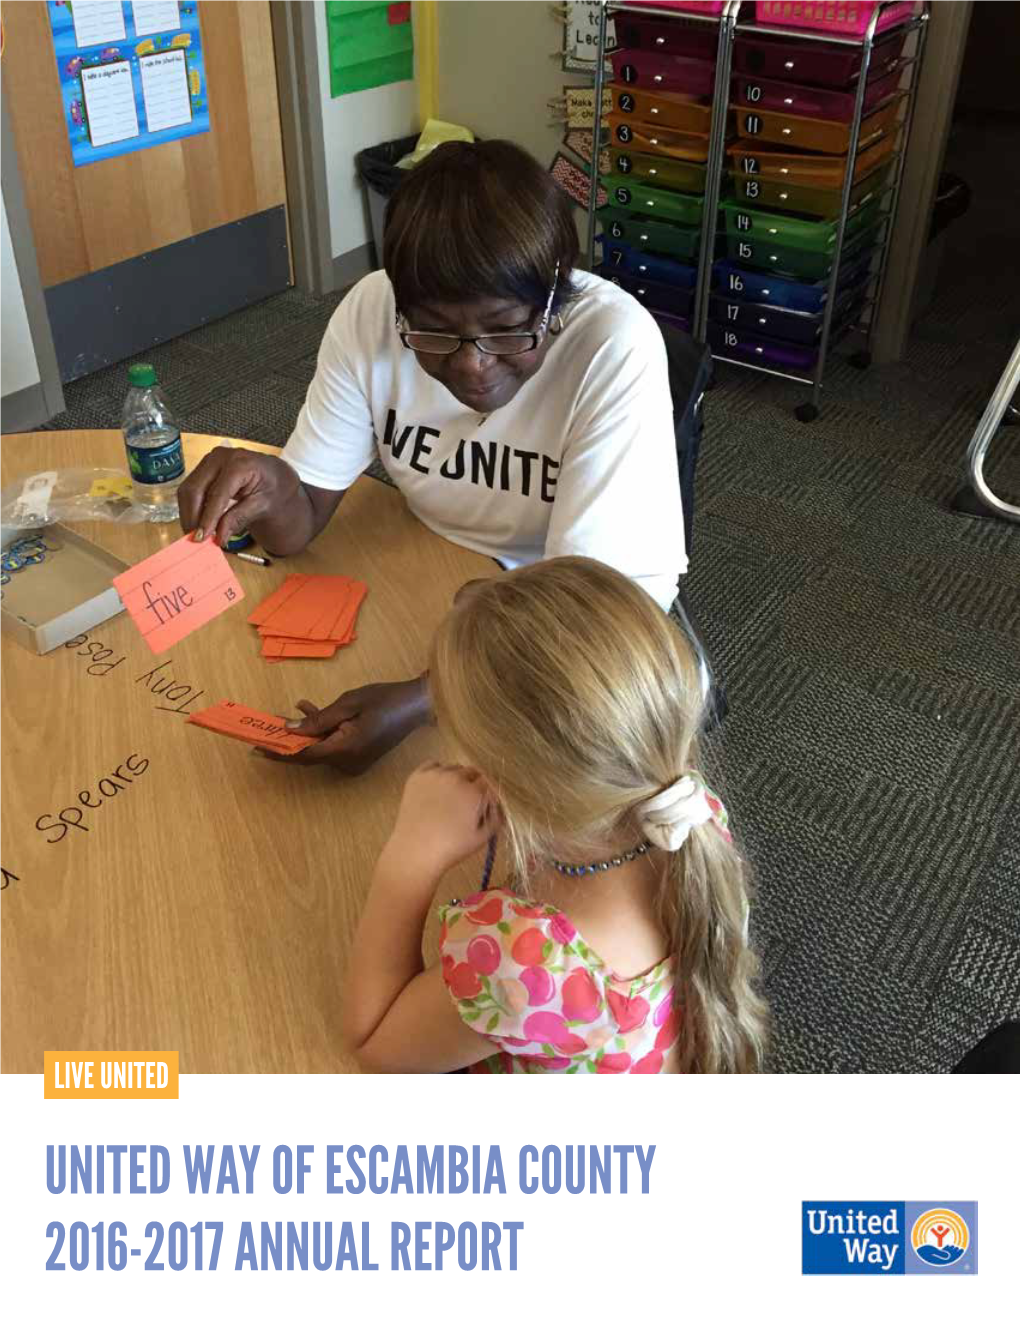 UNITED WAY of ESCAMBIA COUNTY 2016-2017 ANNUAL REPORT in THIS ISSUE LIVE UNITED a Year in Review/Staff